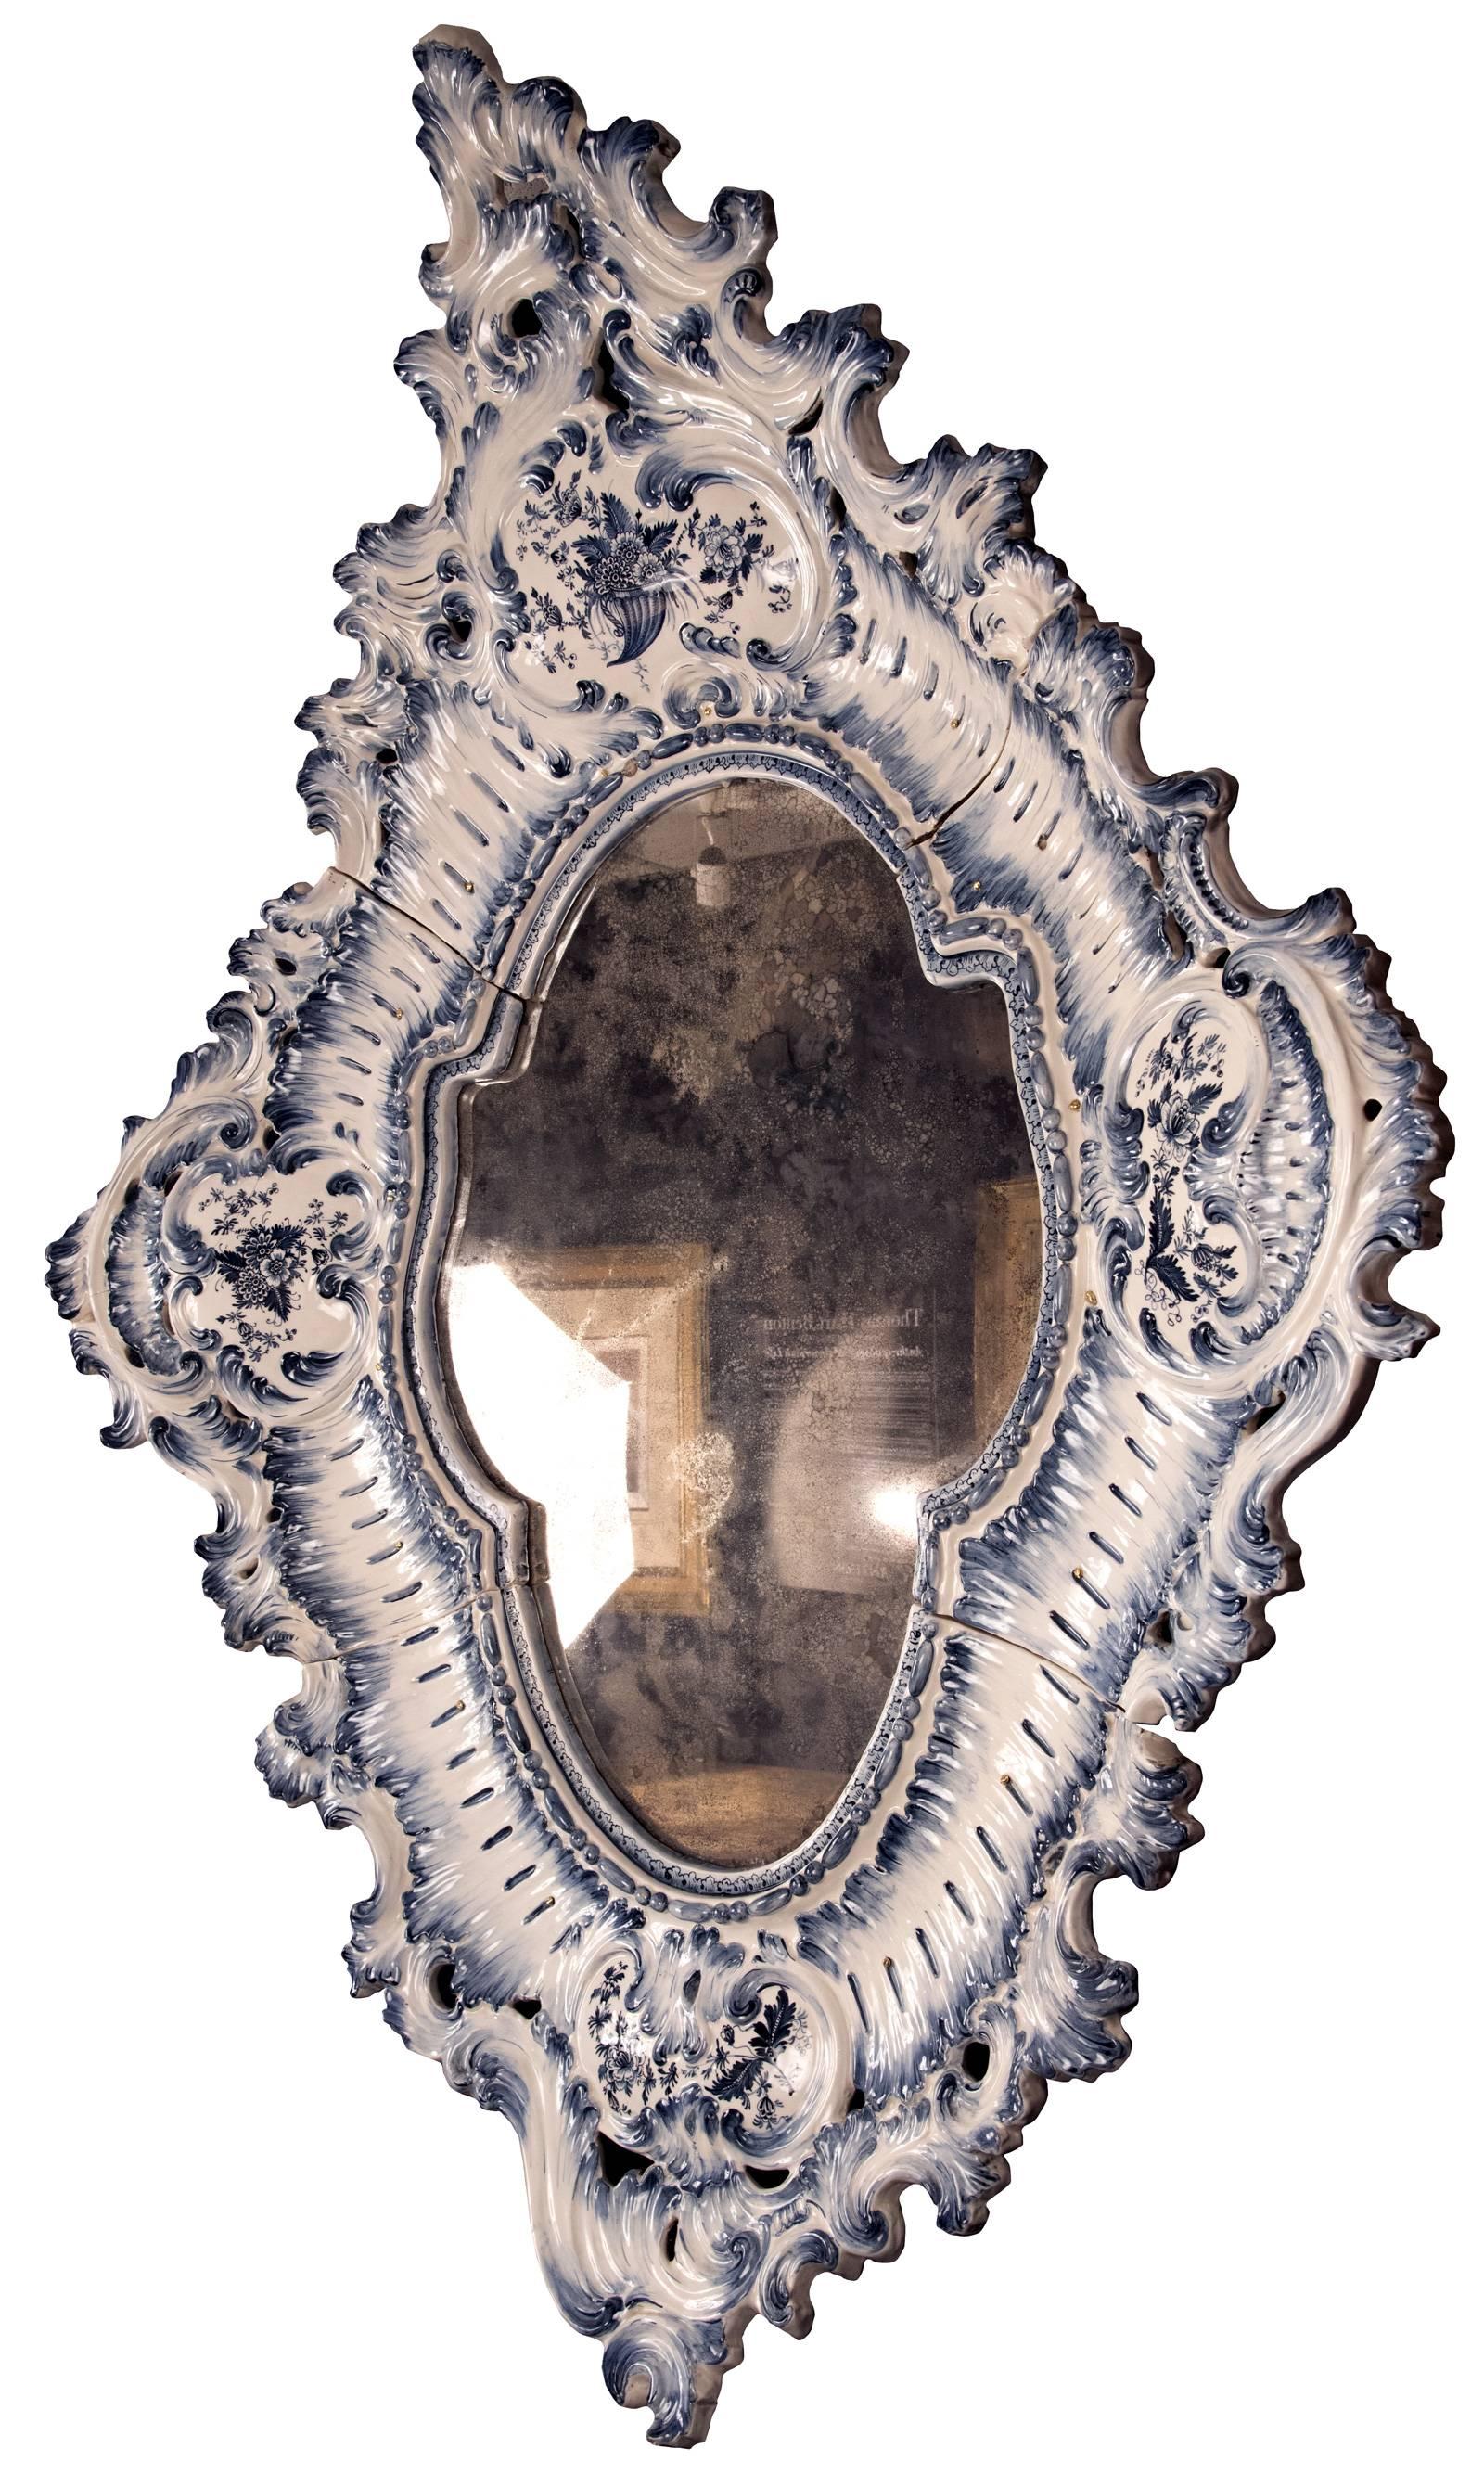 A blue and white Rococo-style porcelain mirror of diamond form with slightly turned in corners, a scrolling filigree border encompassing four cartouches with floral motifs and a centre shaped opening that is back mounted with a metal mirror plate.